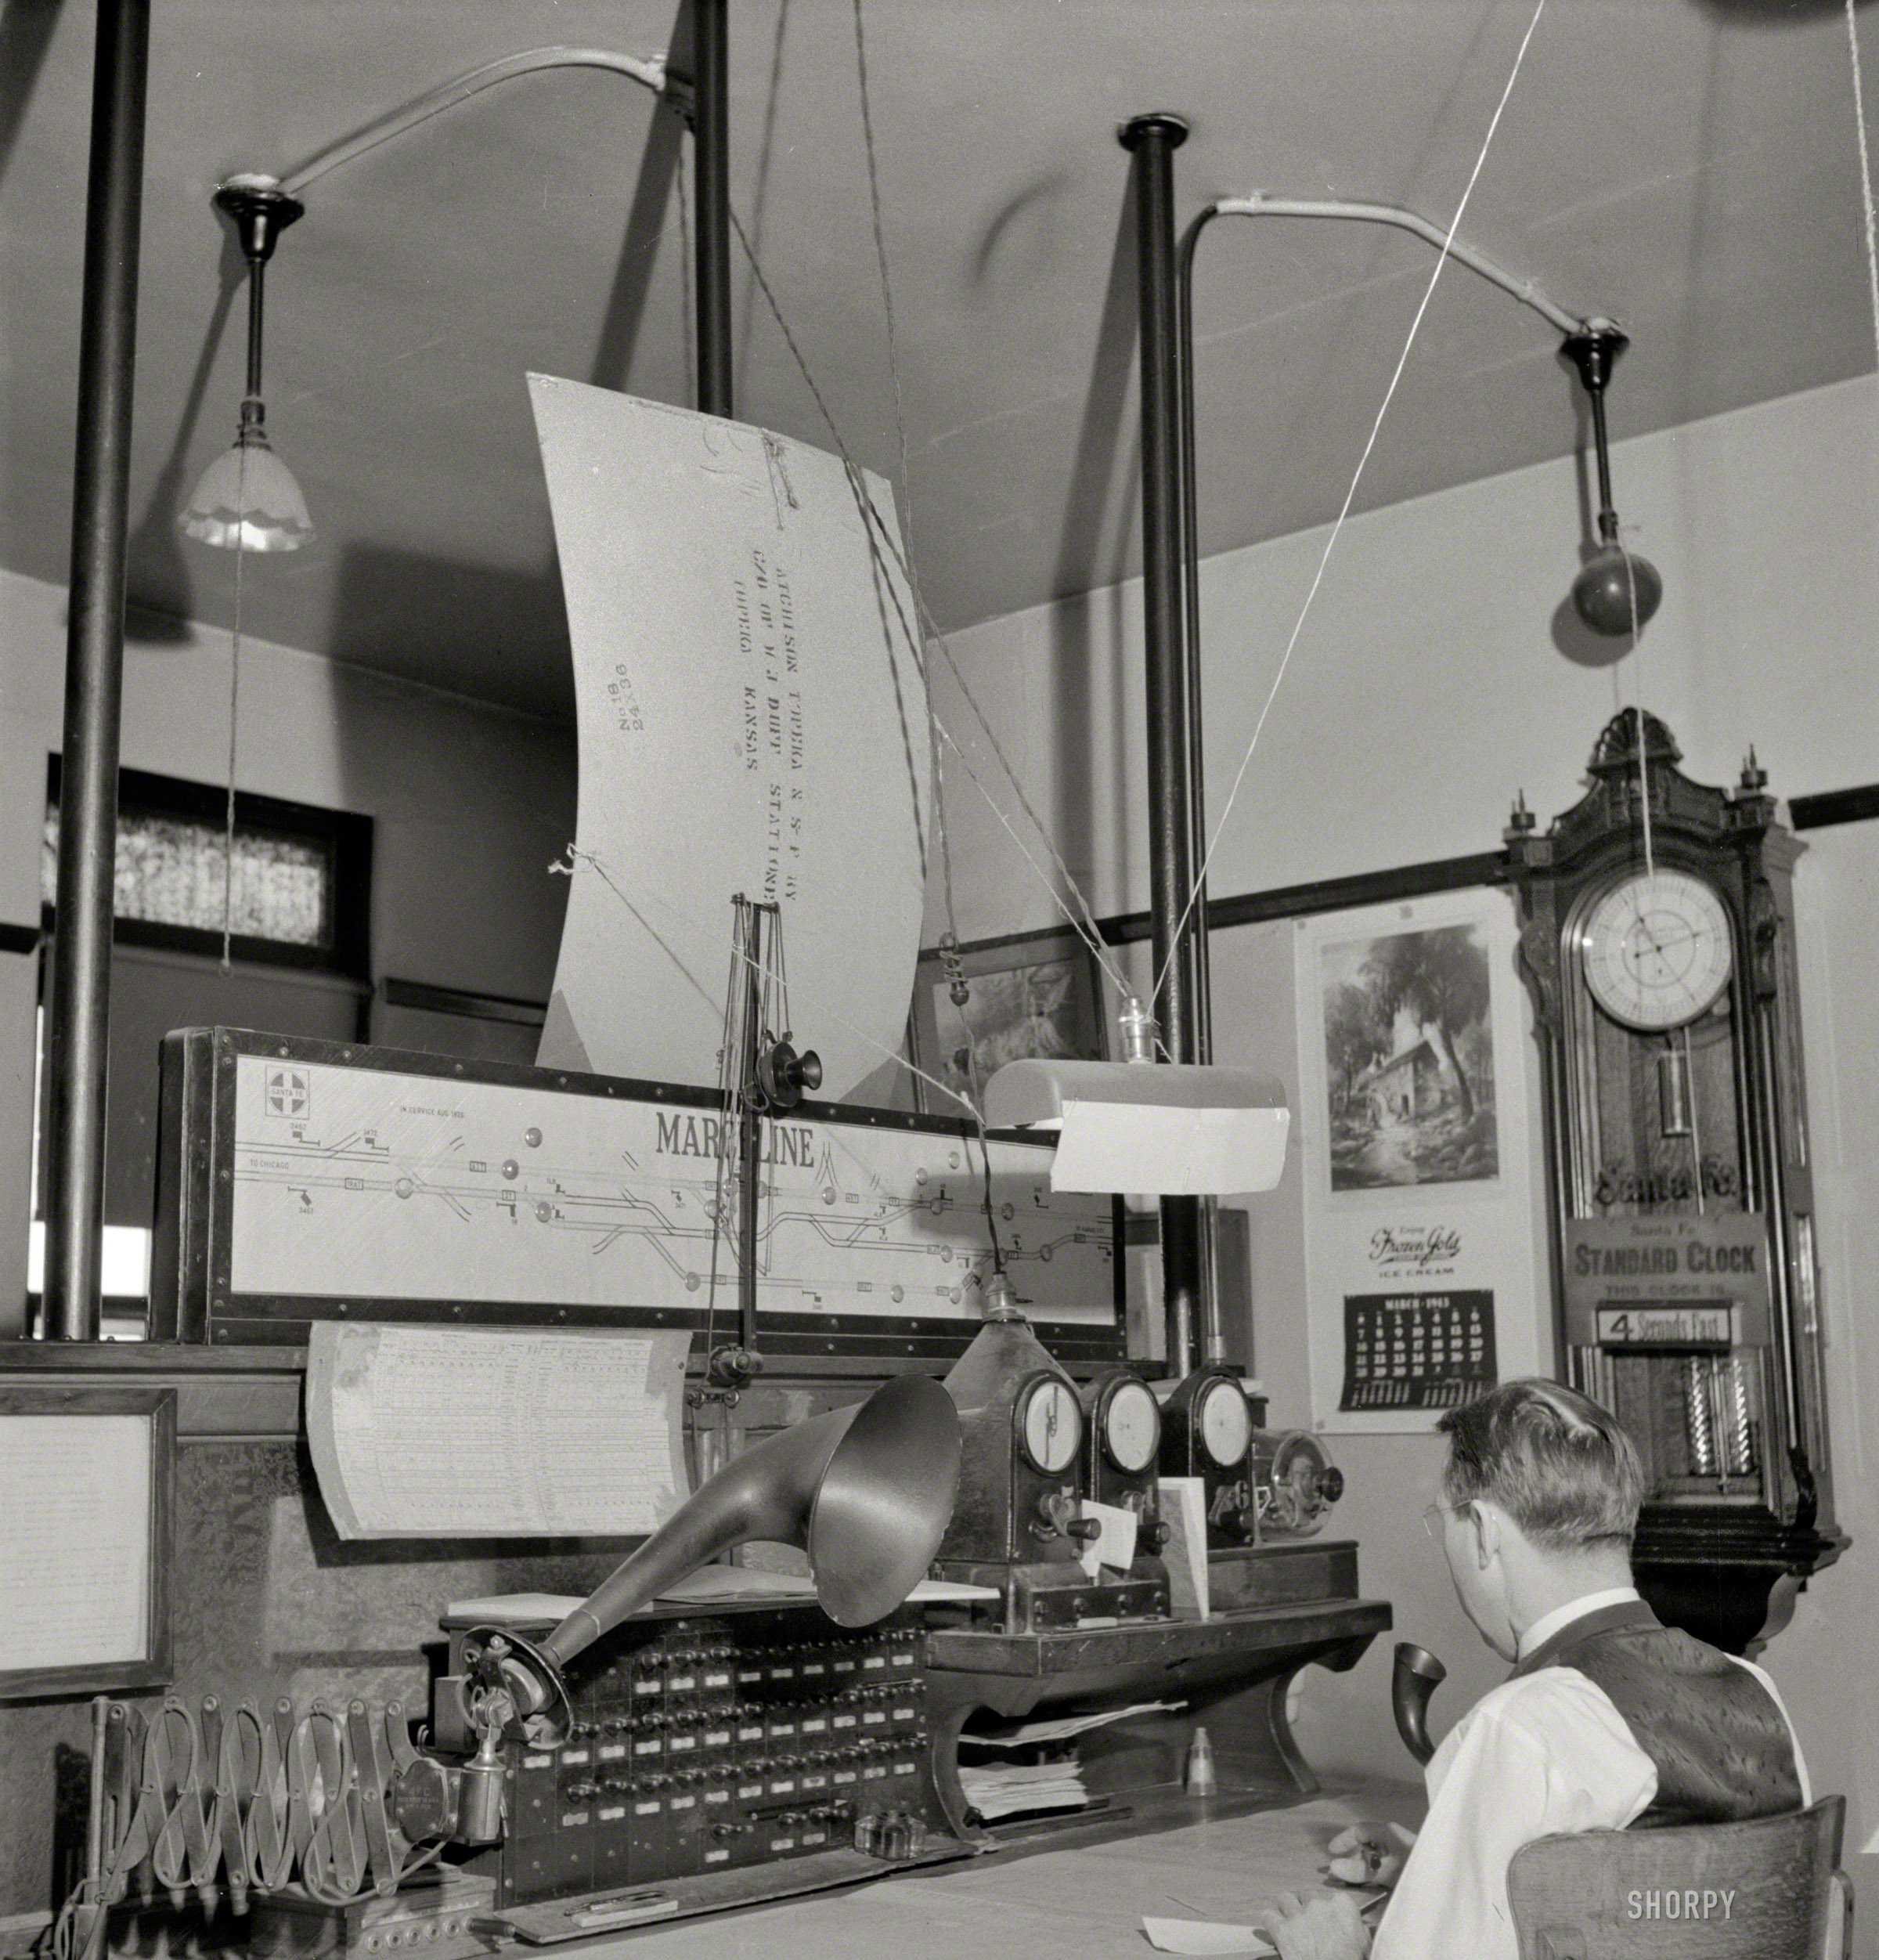 March 1943. More Marceline, Missouri. "A dispatcher at work in the Atchison, Topeka & Santa Fe Railroad offices." This fellow would seem to be sensitive to glare. Photo by Jack Delano for the Office of War Information. View full size.